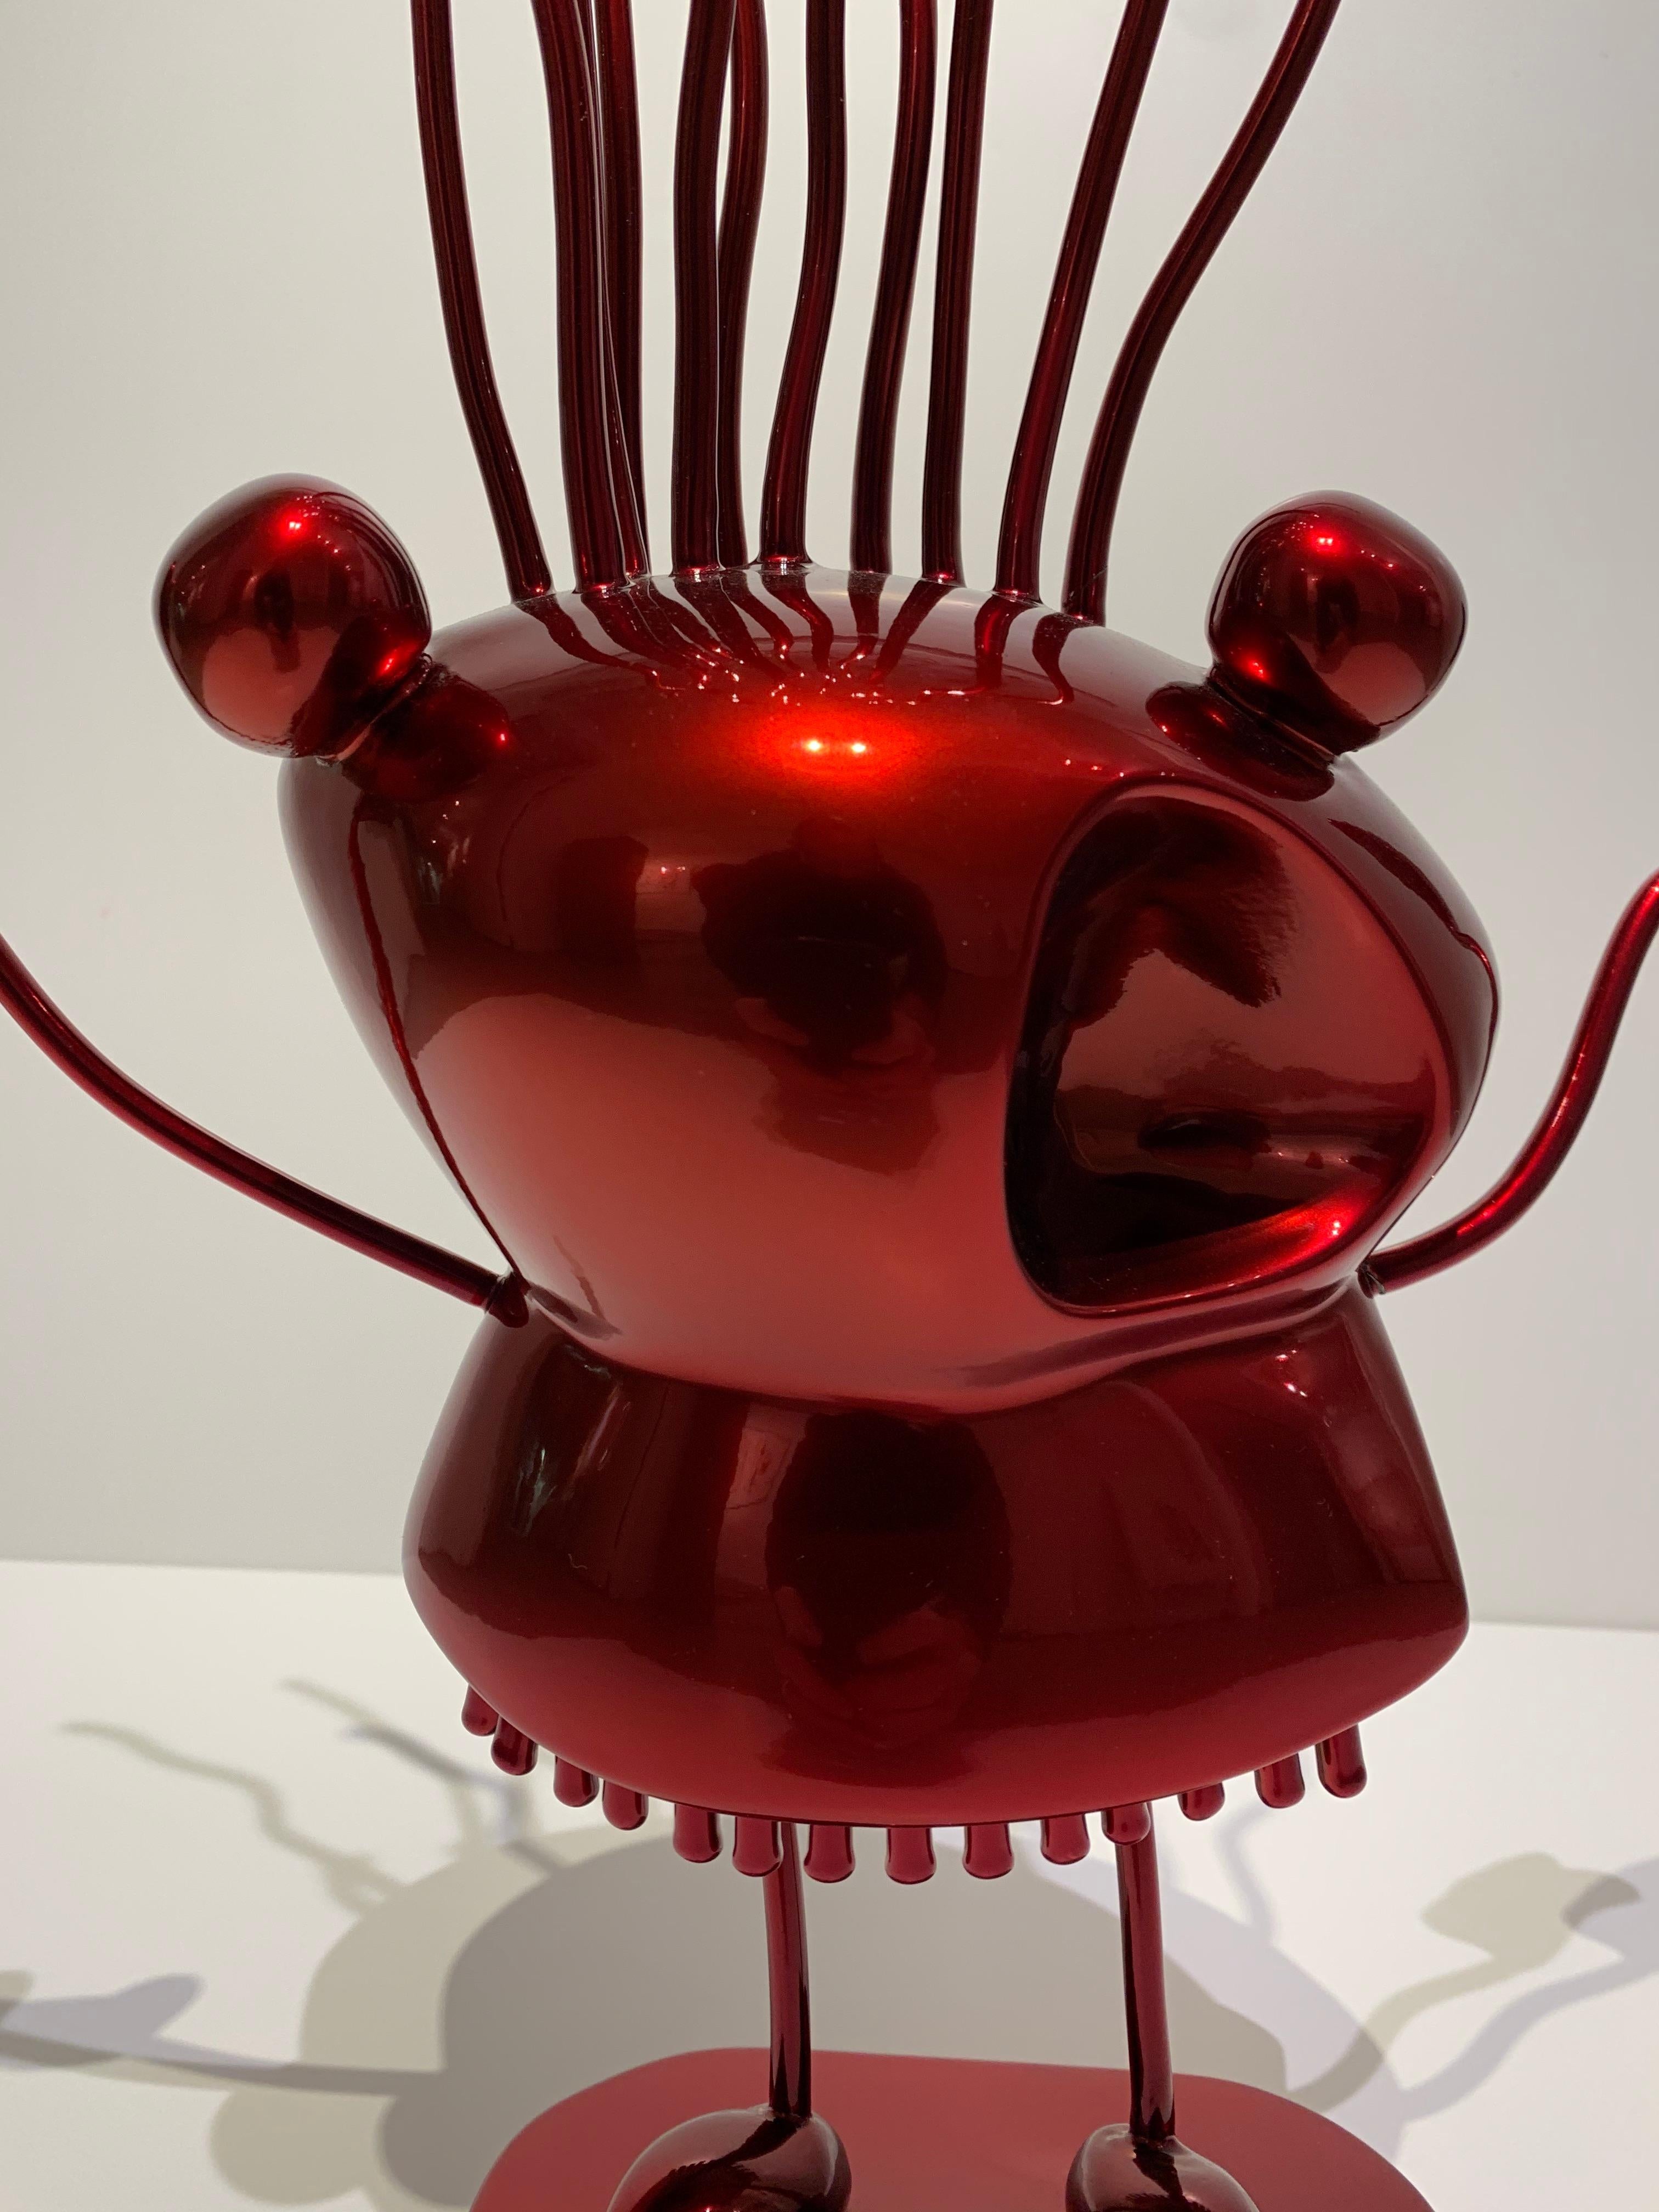 Xavi Carbonell, Le Petite Folle, 2019, Hi-Gloss Red Painted Sculpture 2